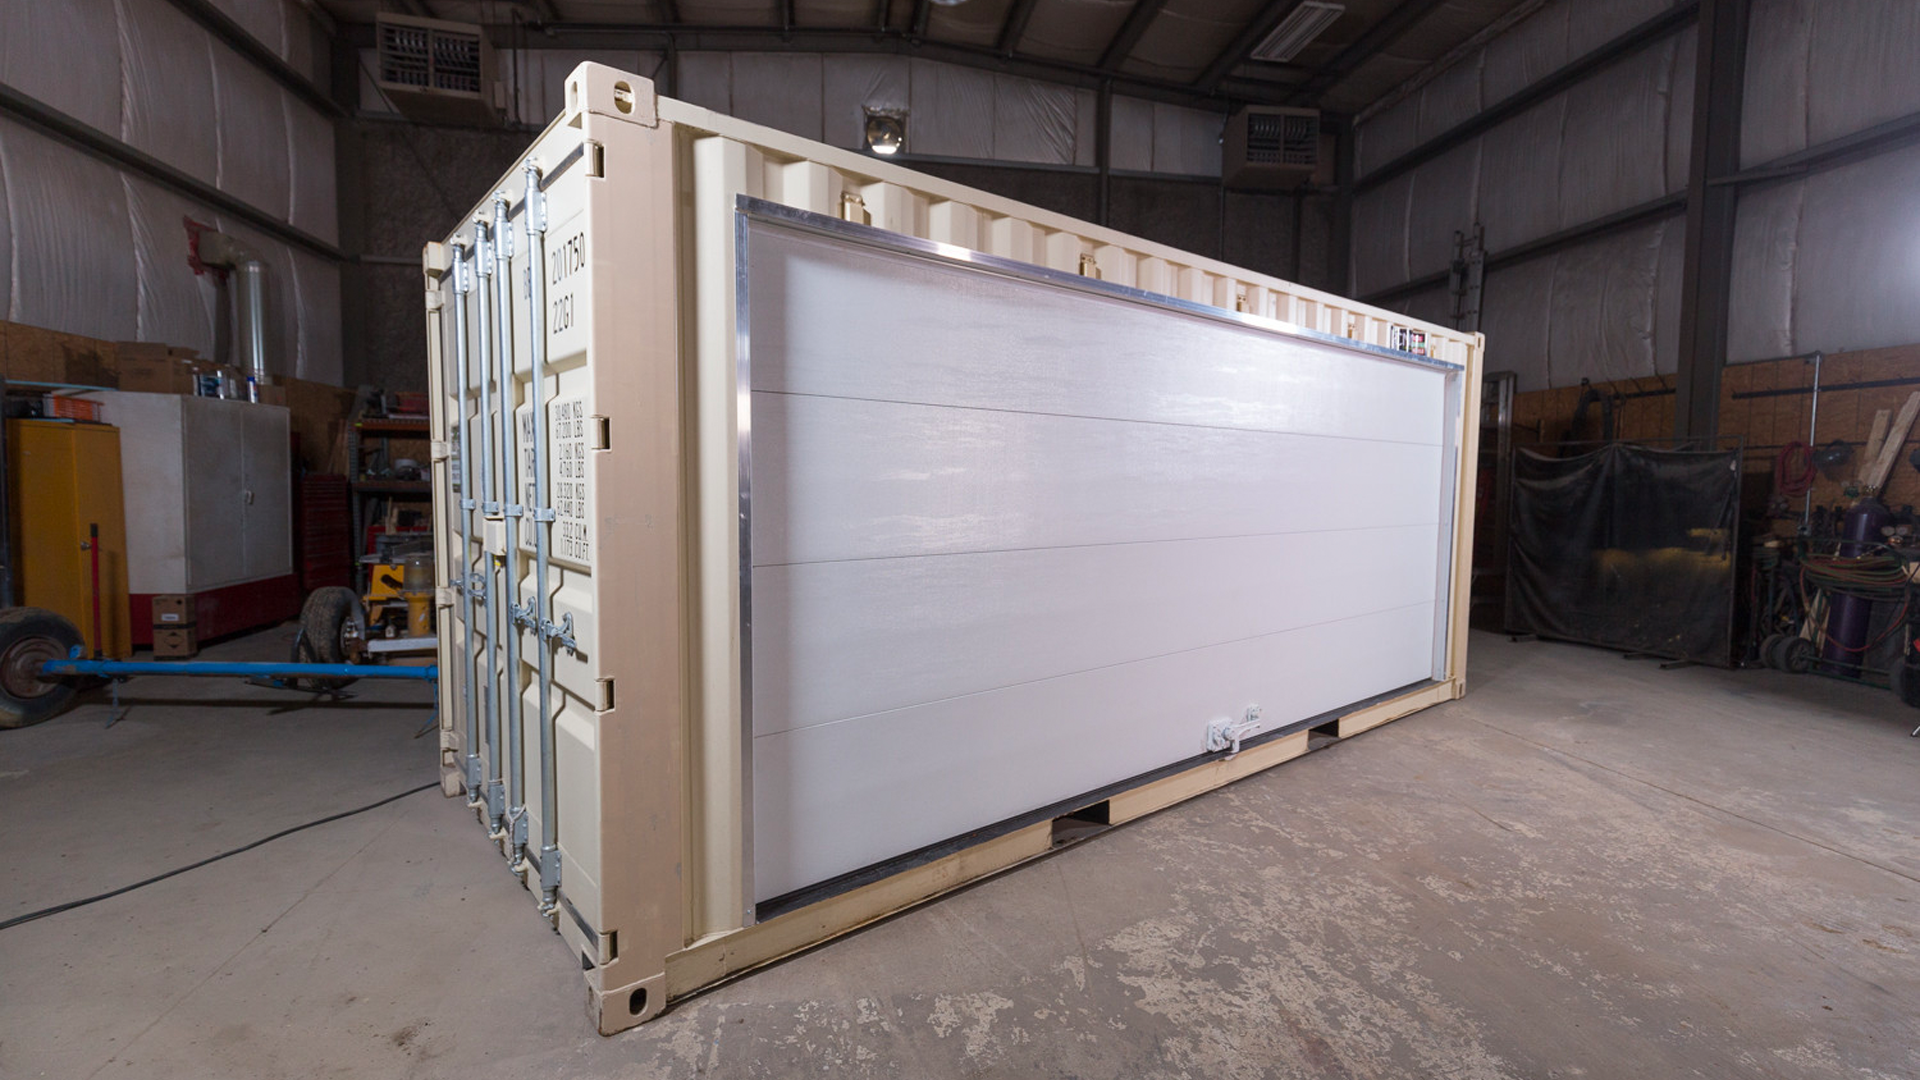 Exterior of container with one large garage door